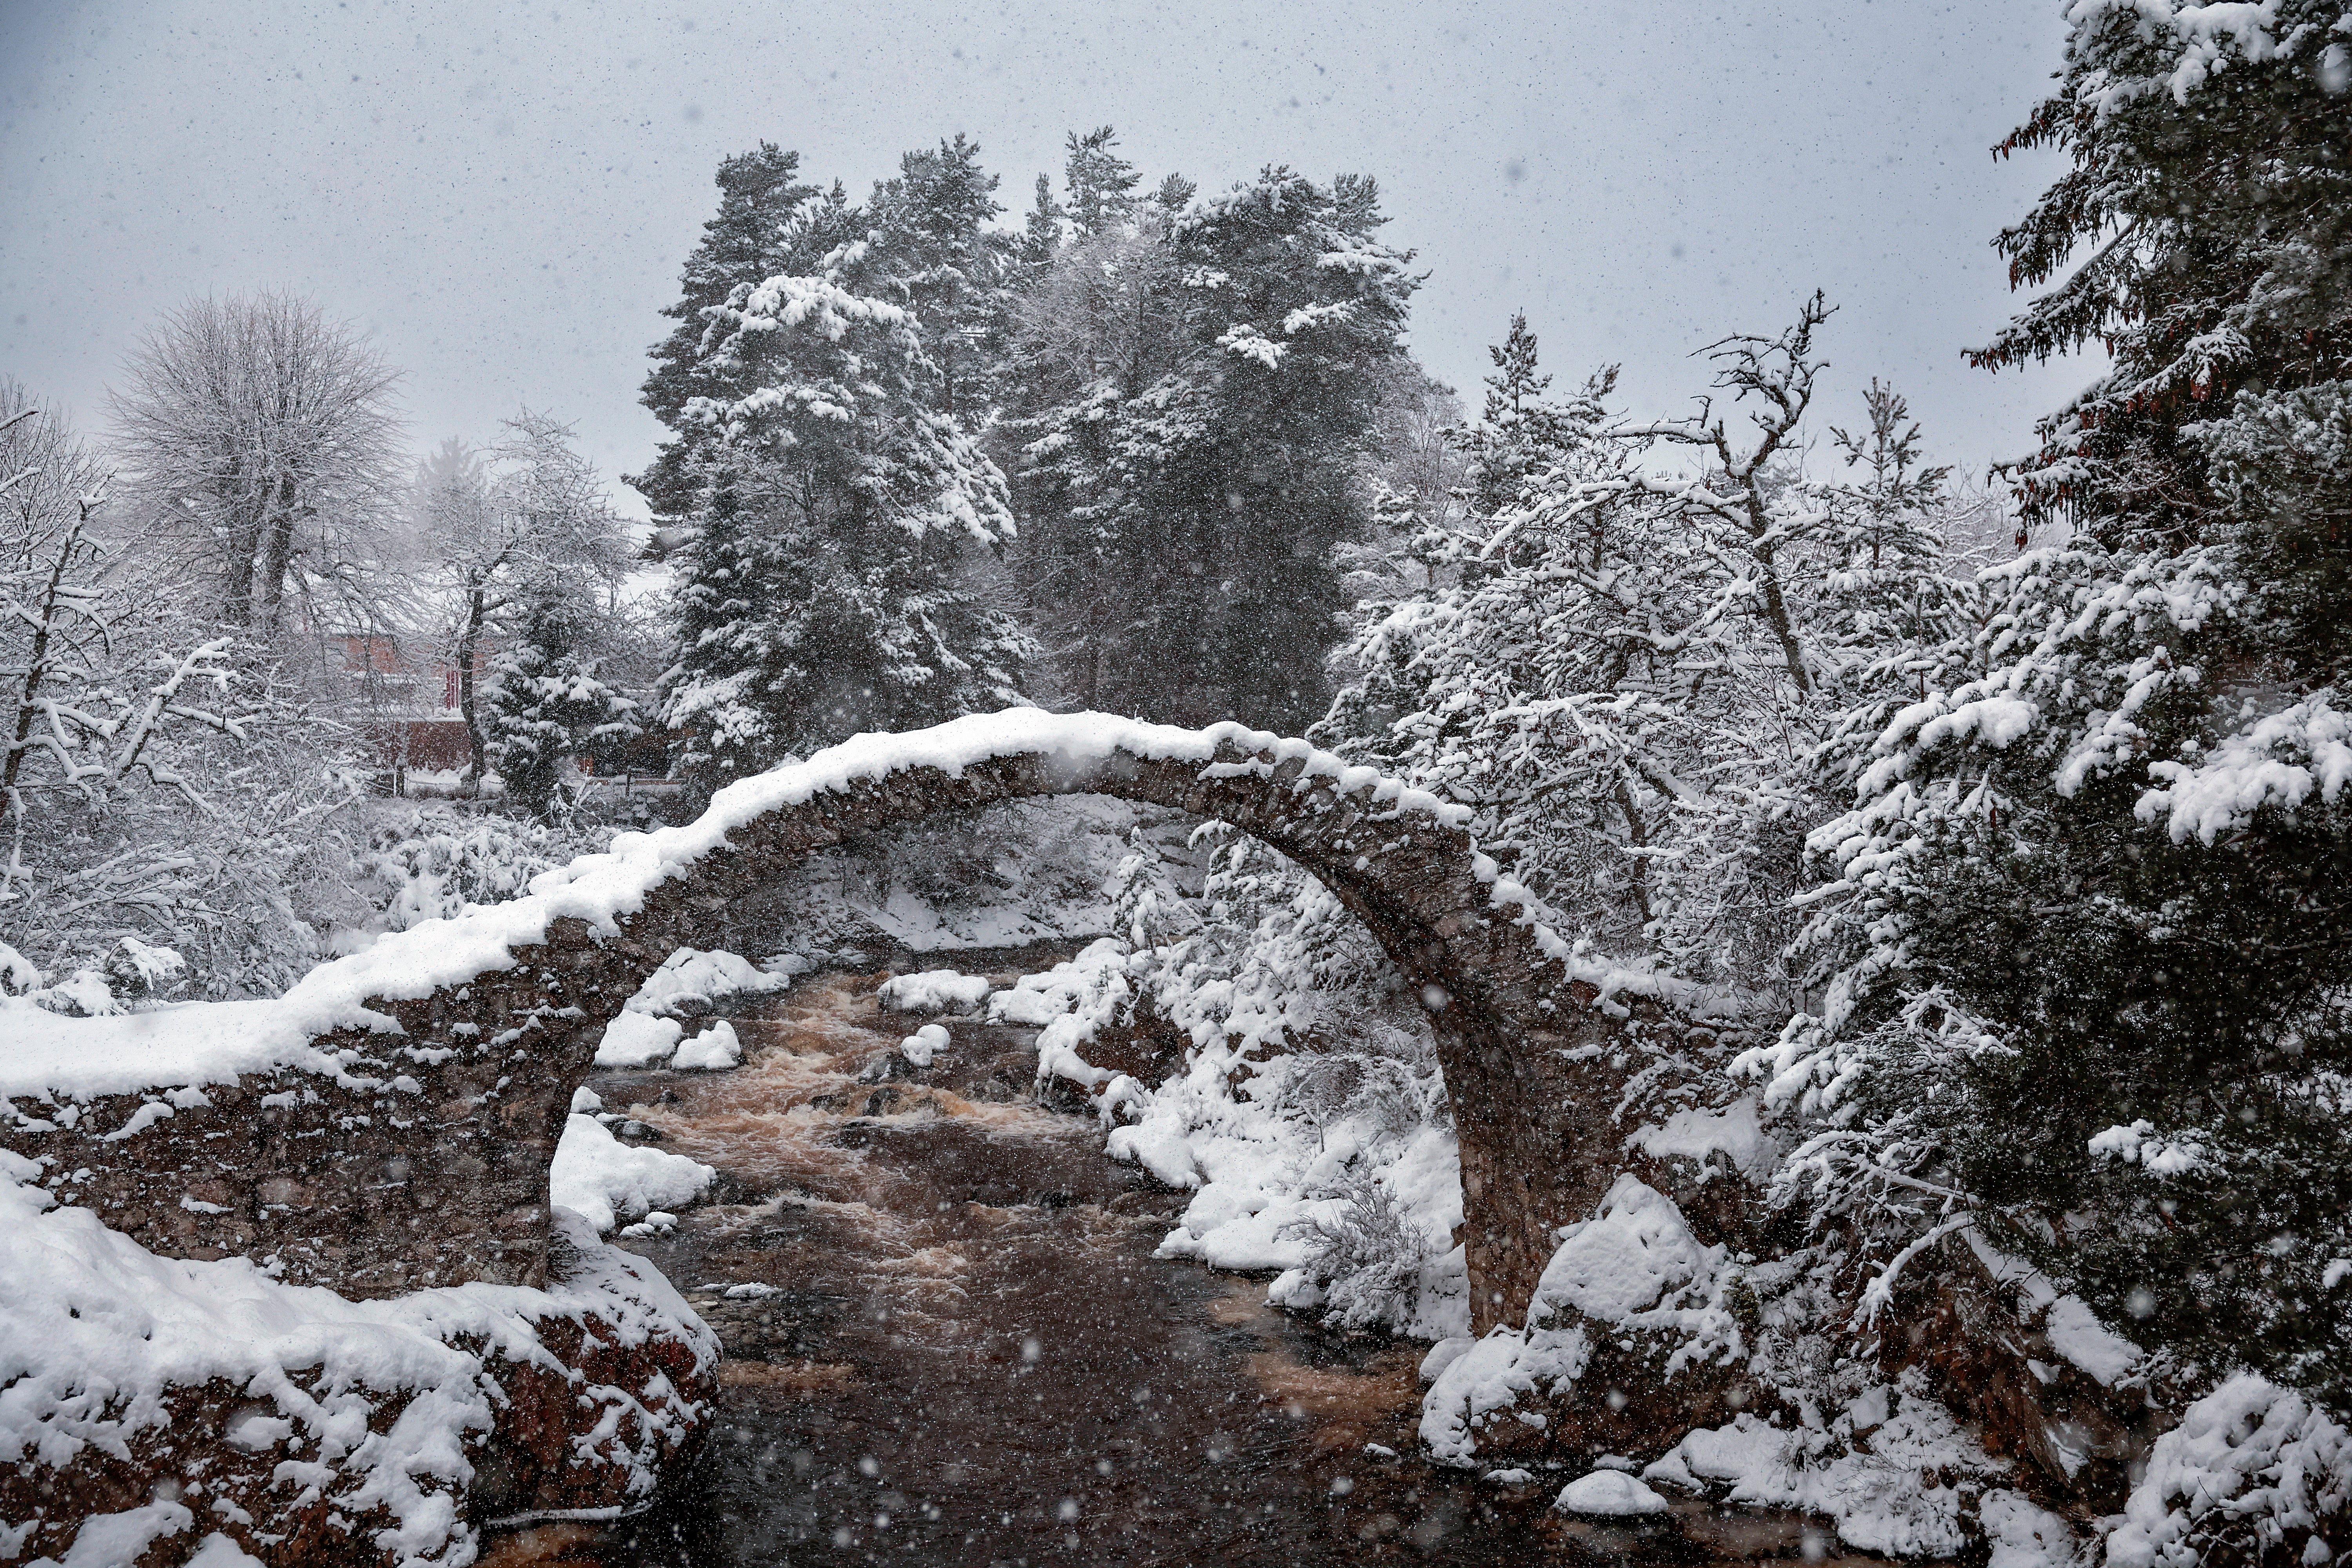 Snow falls over Old Pack Horse Bridge in Carrbridge in the Highlands